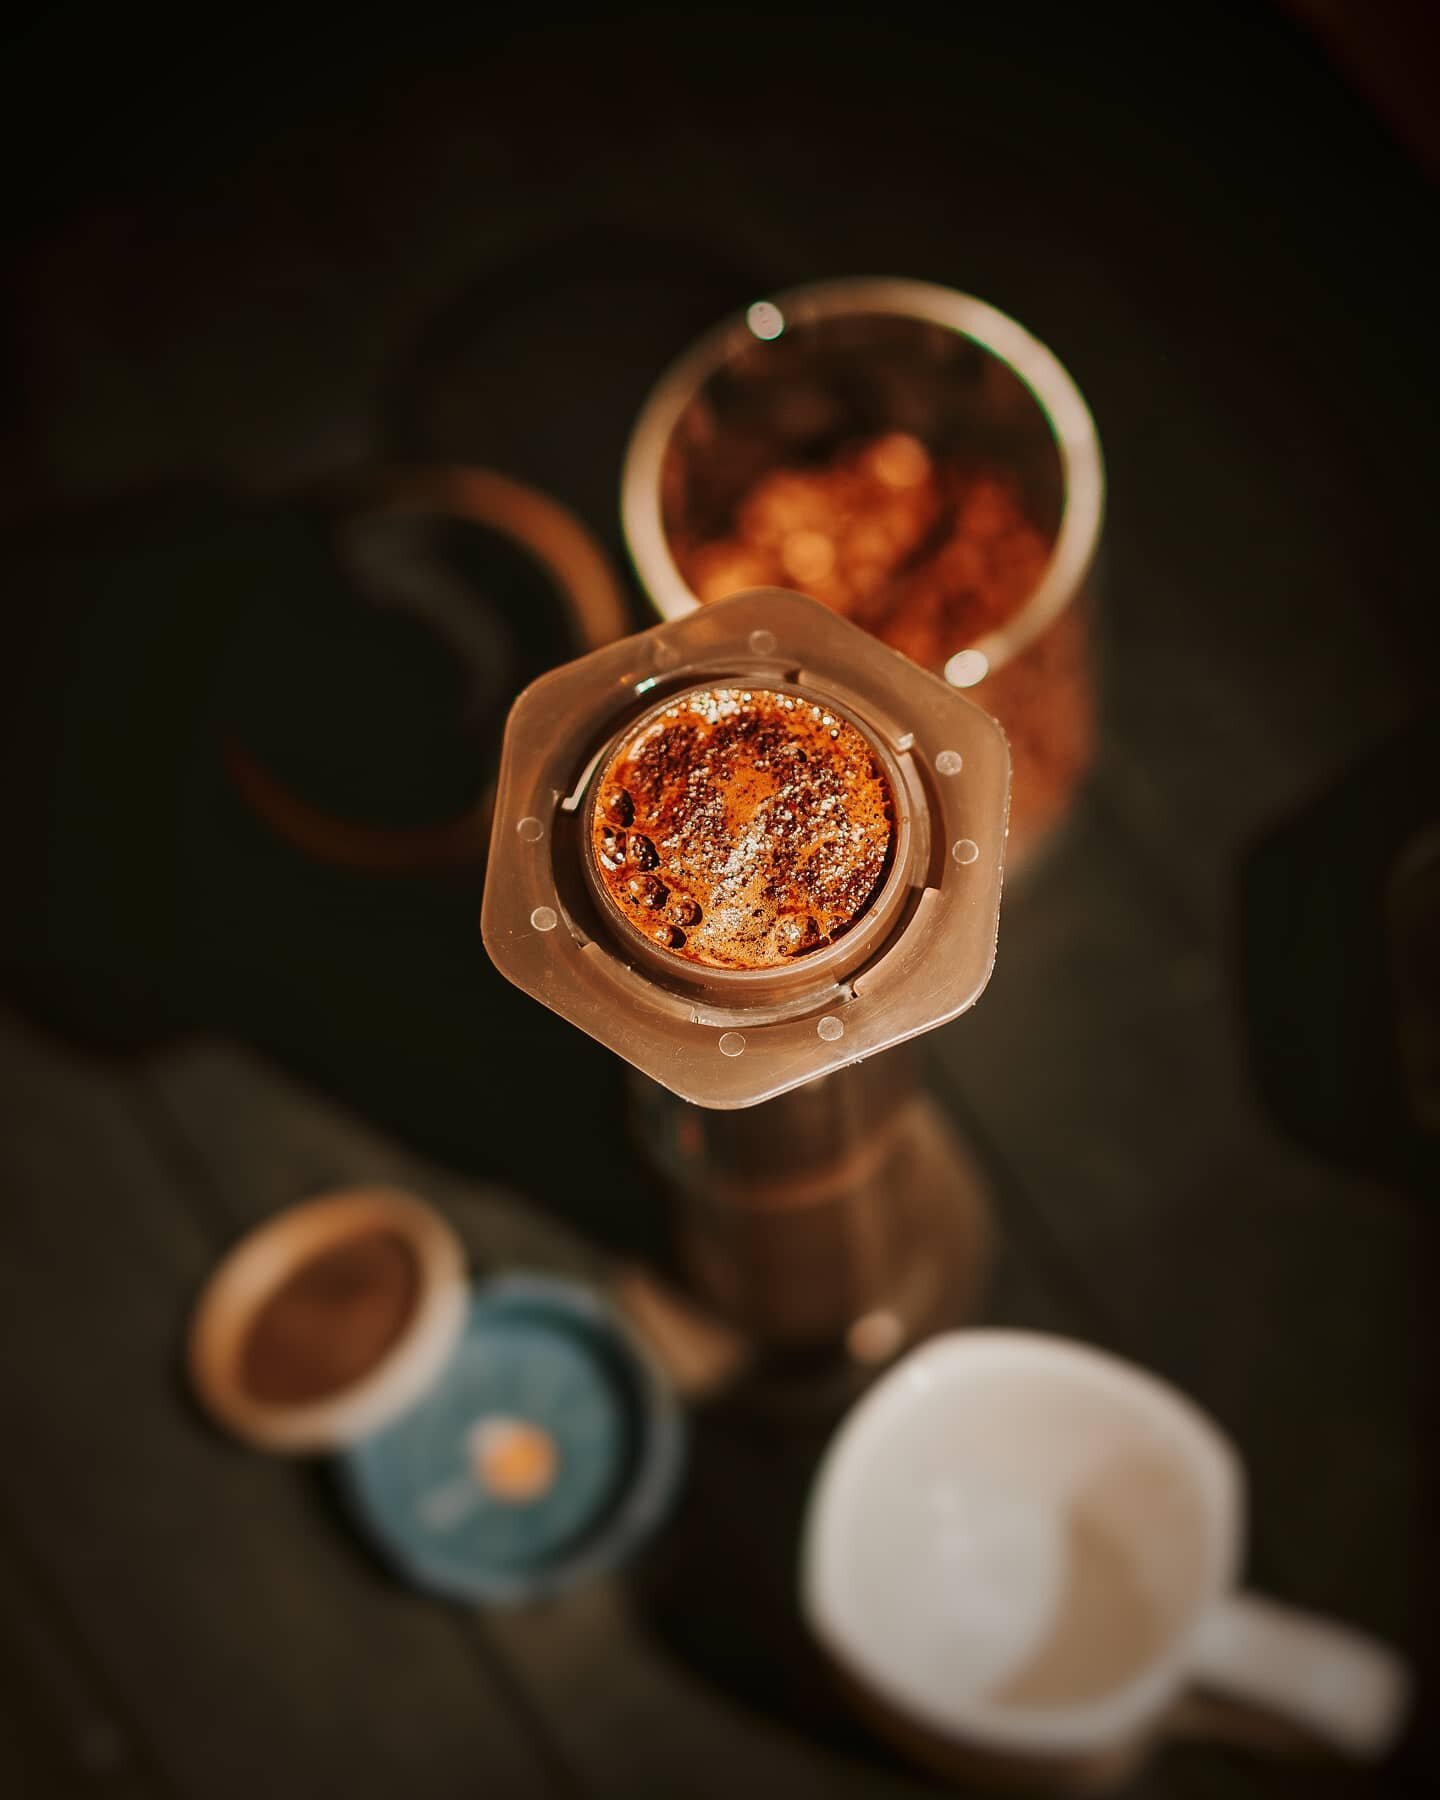 I thought hard about a caption, but got nothing. Am I back? Who knows...

#kylearchibaldphotography #coffee #coffeetime #fullbloom #fullbloomcoffeeroasters #docoffeebetter #aeropress #aeropresscoffee #brewmethods #pourovercoffee #coffeeshots #coffeeh